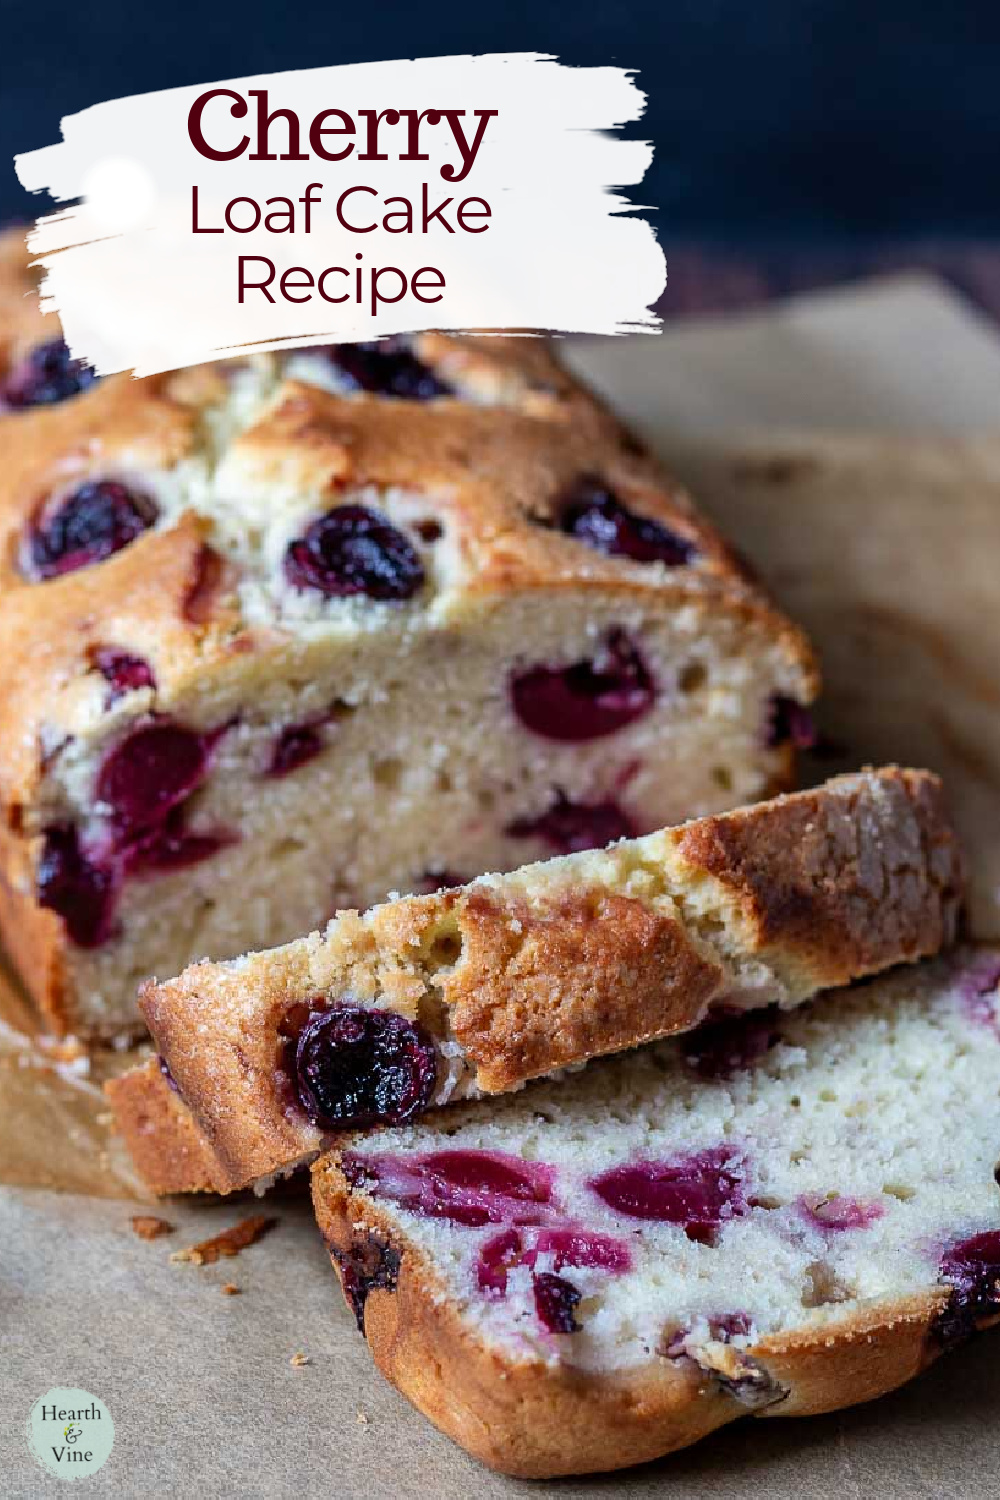 Cherry loaf cake with a few slices.